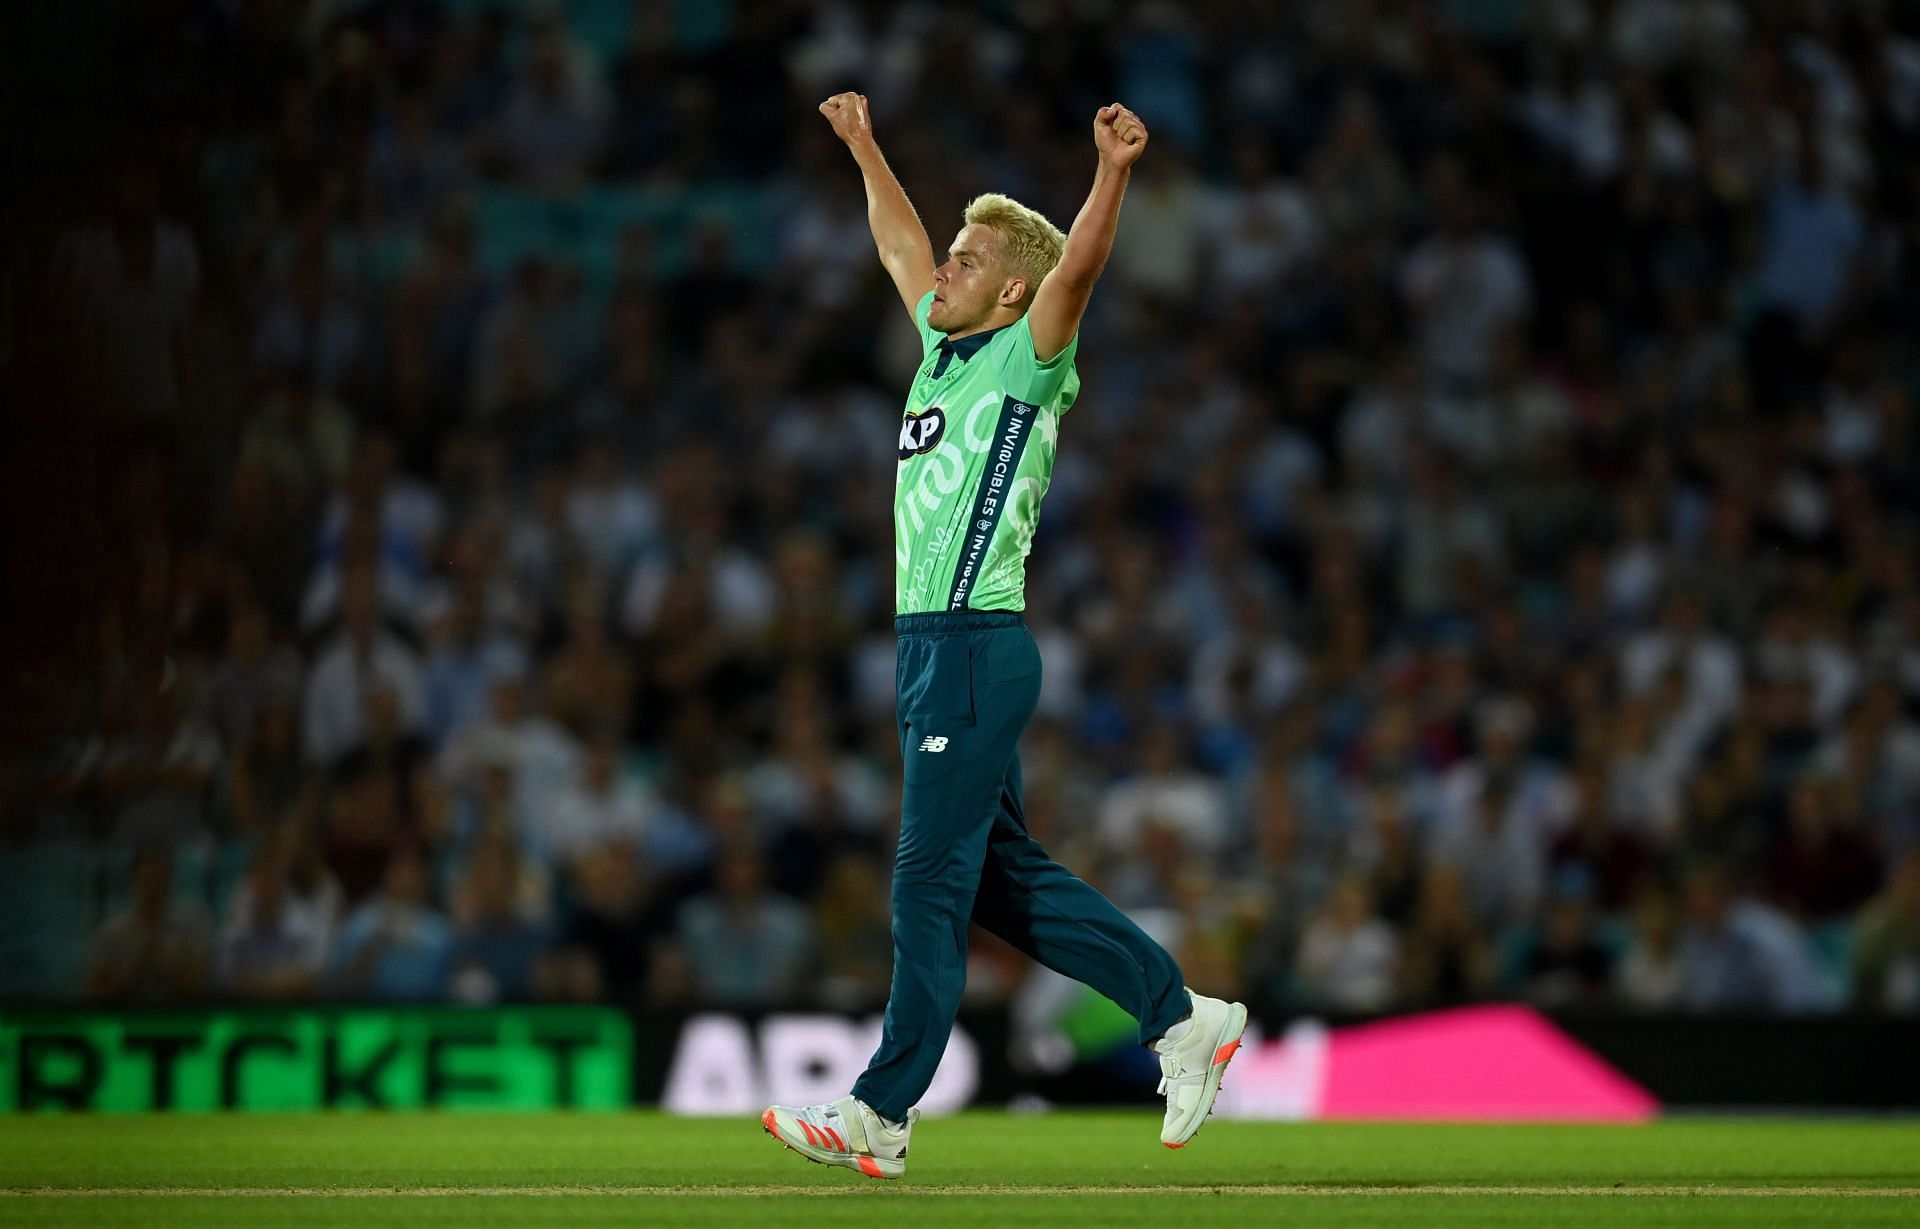 Sam Curran can be a valuable asset to any T20 side.